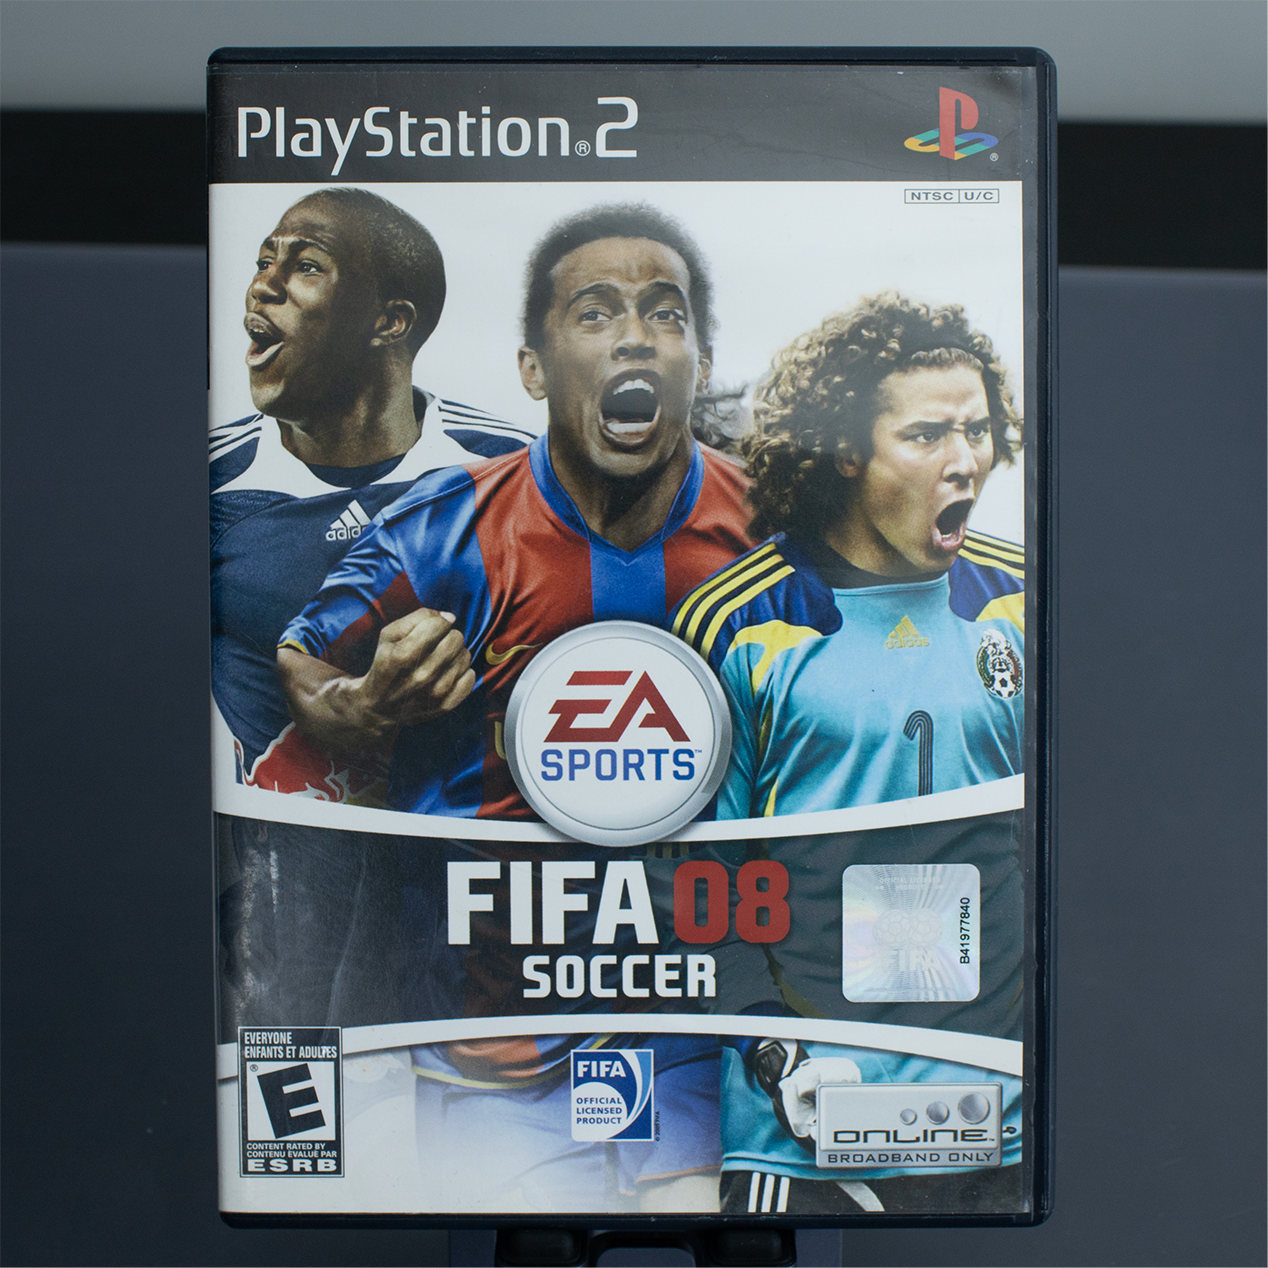 FIFA 08 Soccer - PS2 Game